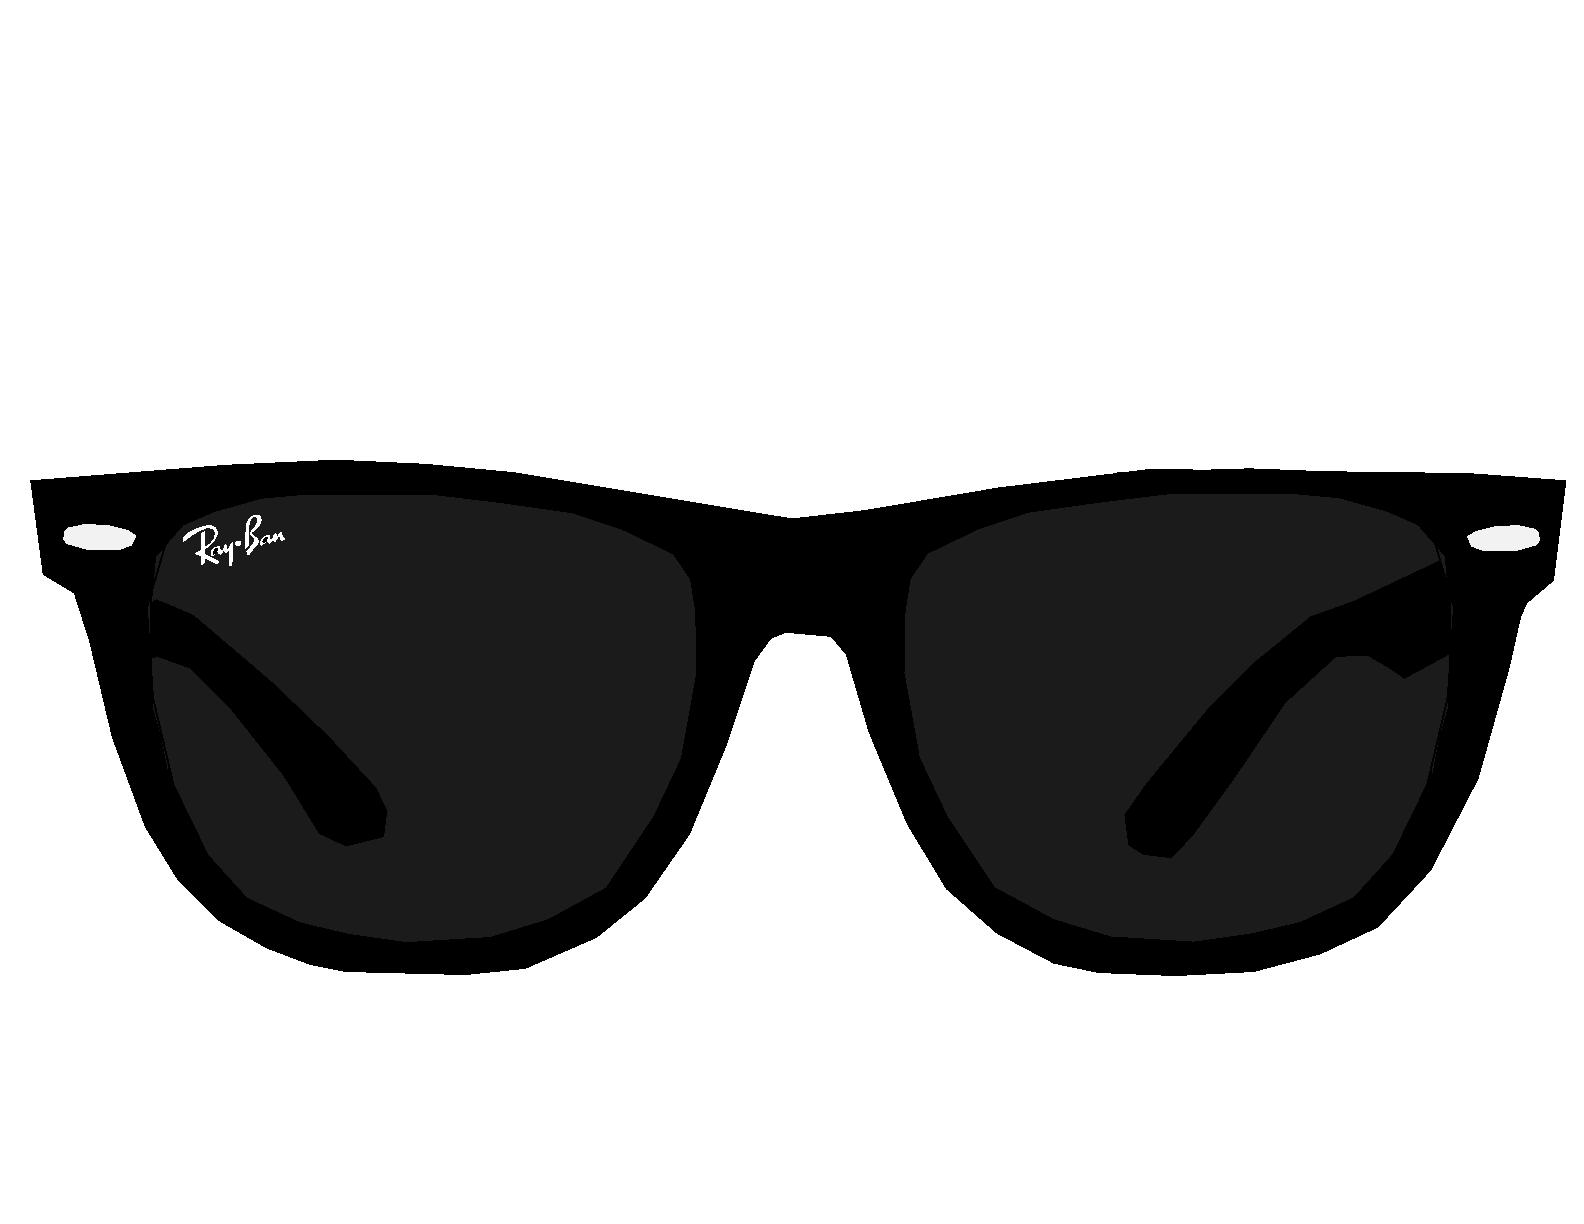 Free sunglasses clip art free vector for free download about 5 - Clipartix